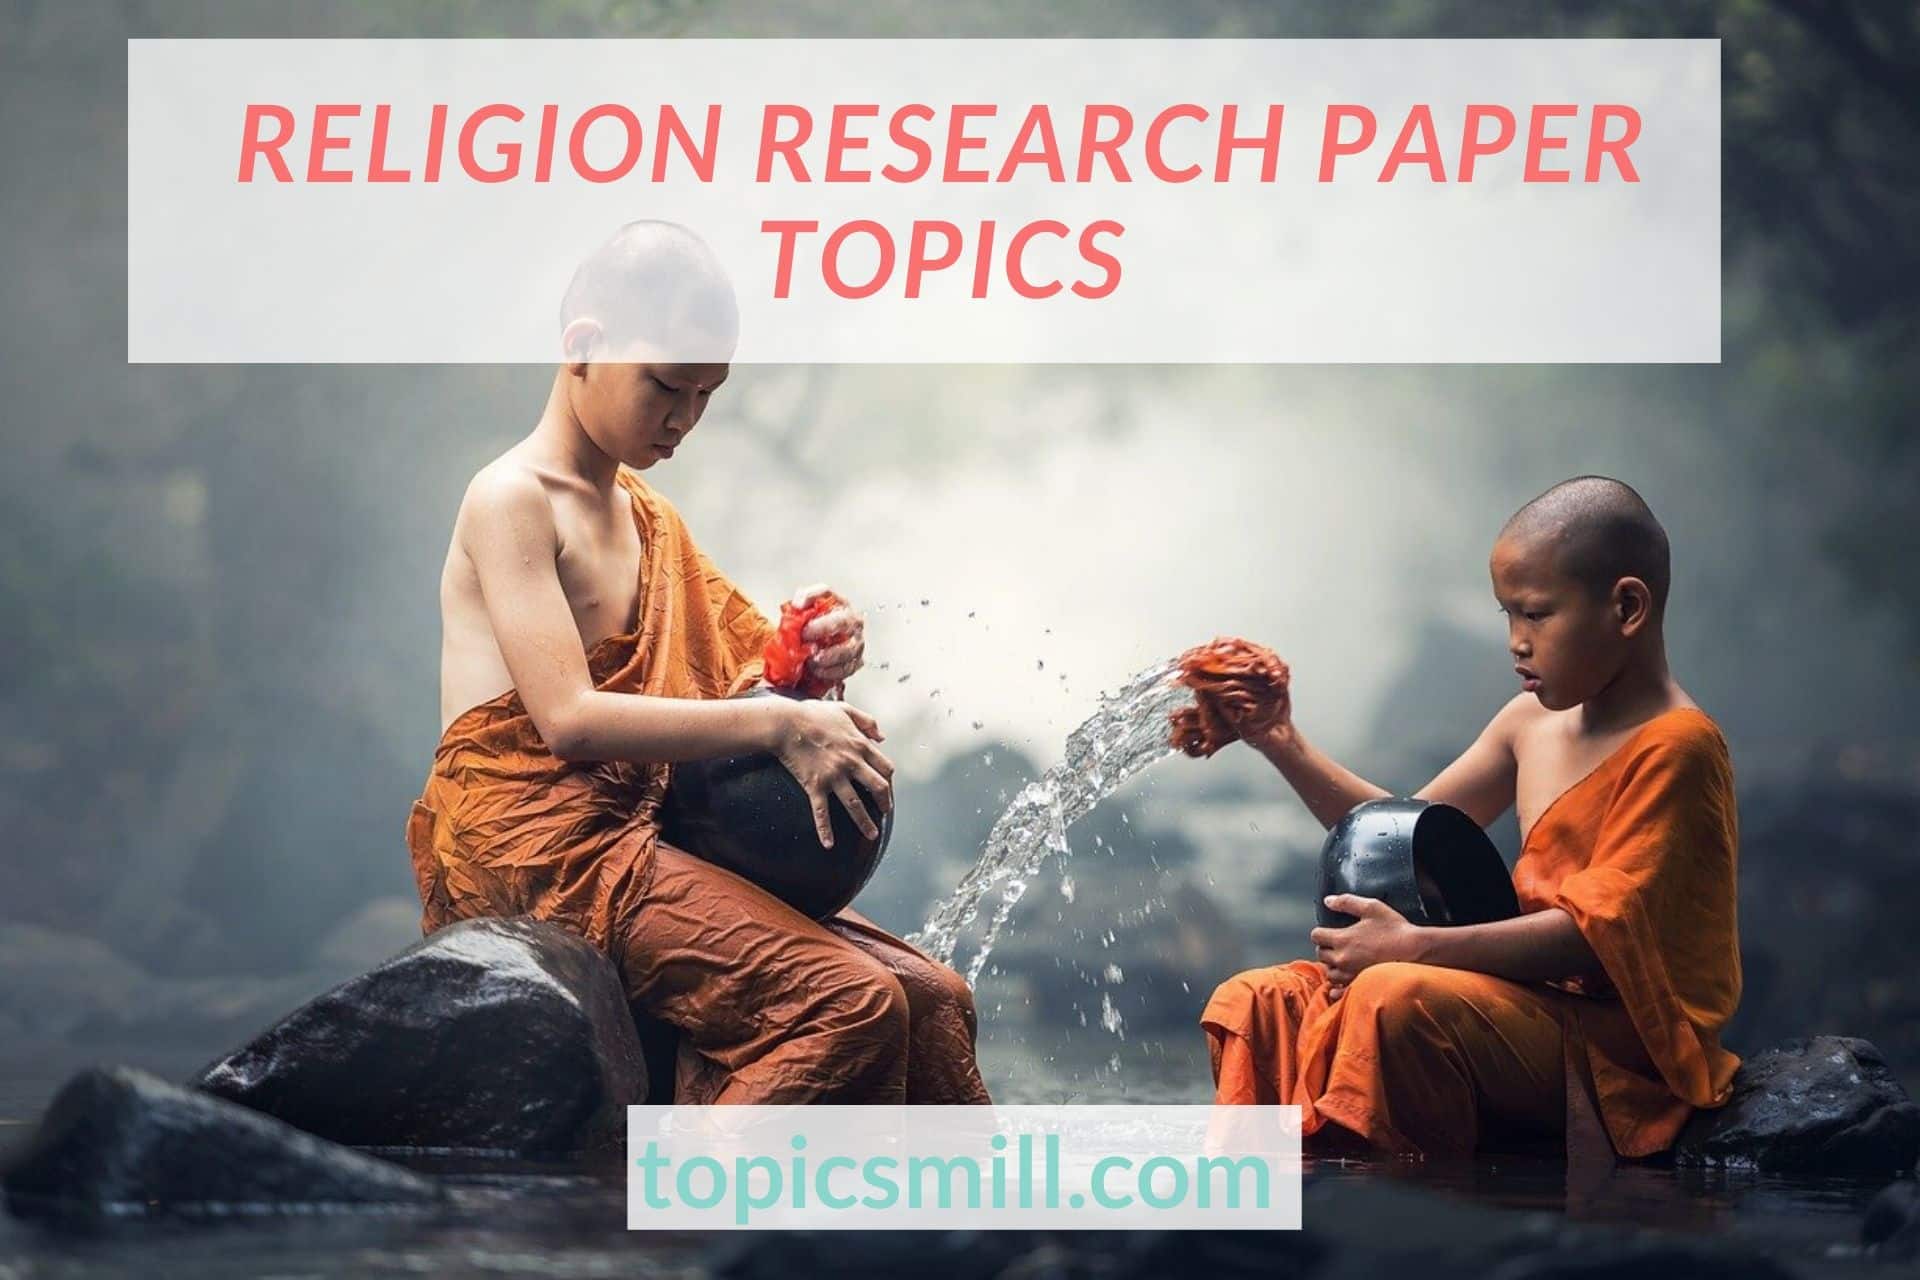 Religion research papers